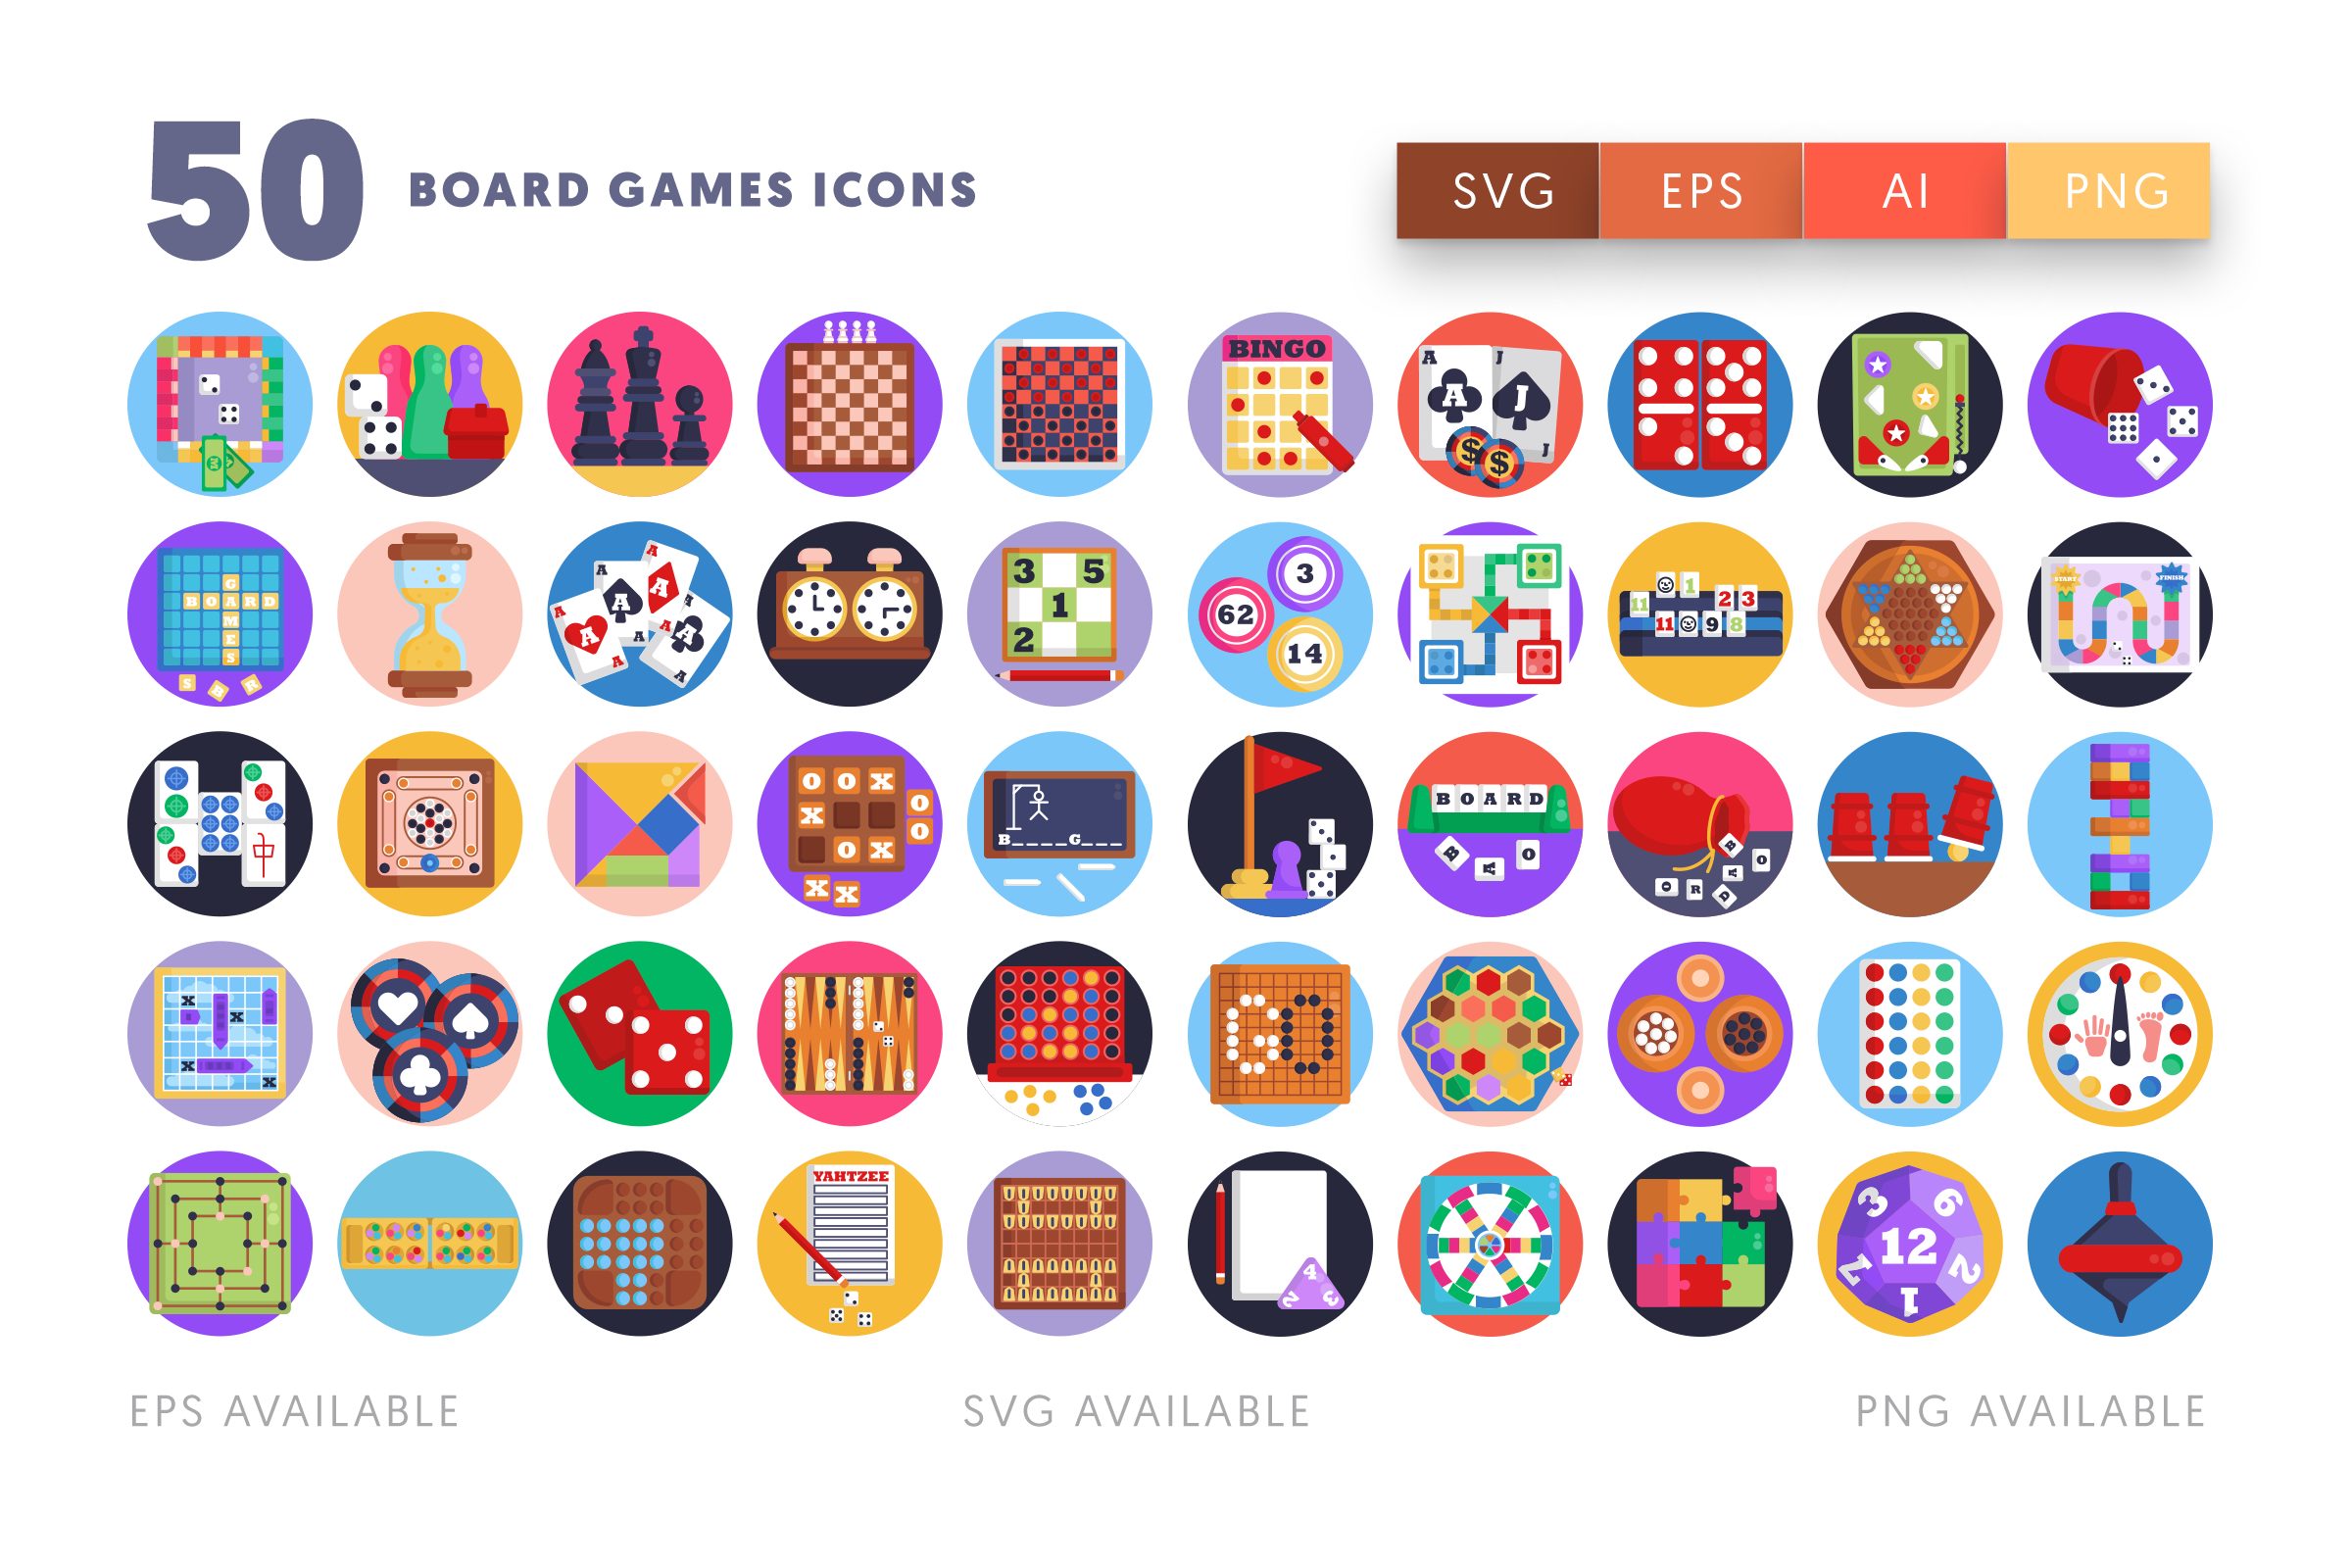 Board Games icons png/svg/eps